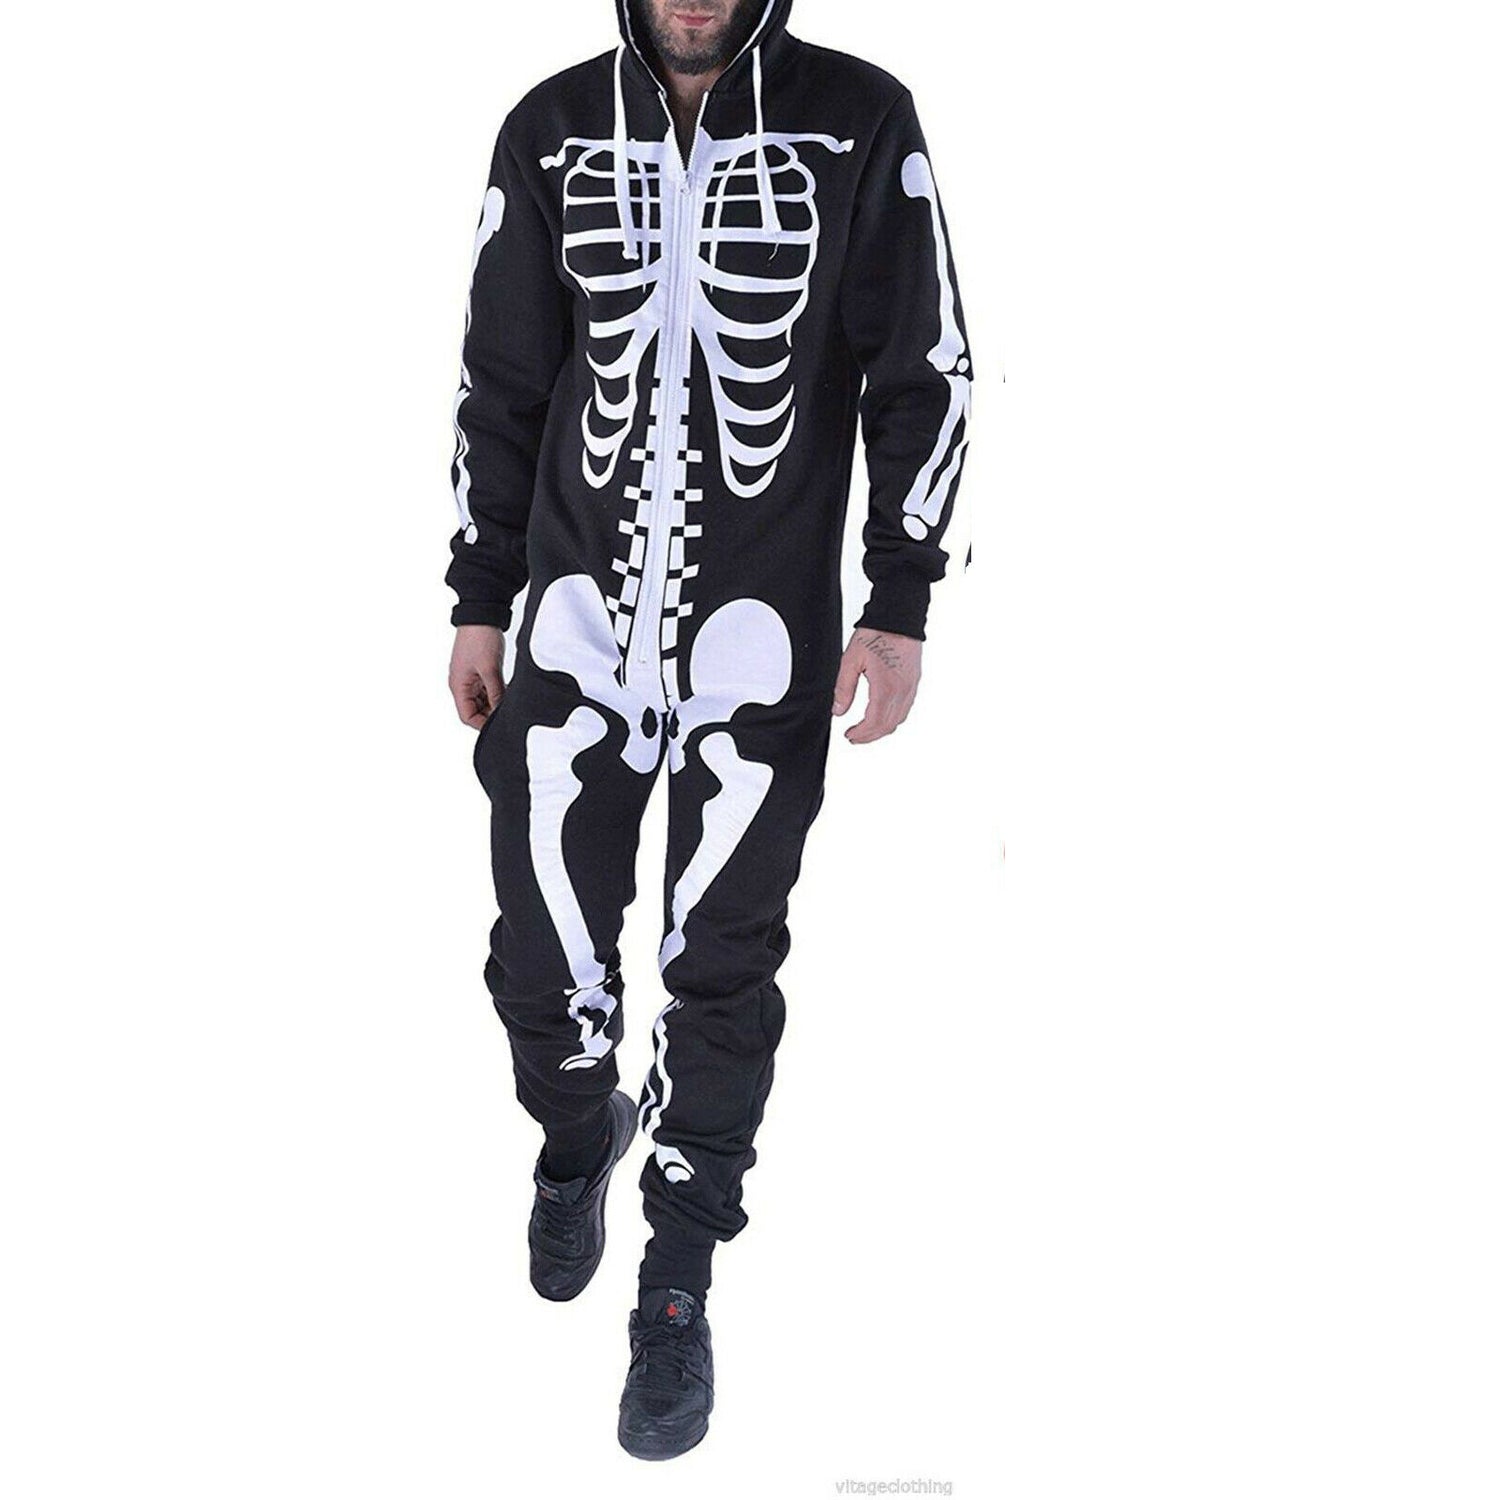 Adult Black Skeleton Onesie. Perfect For Halloween. Sizes Start At A Small And Go To An X-Large.